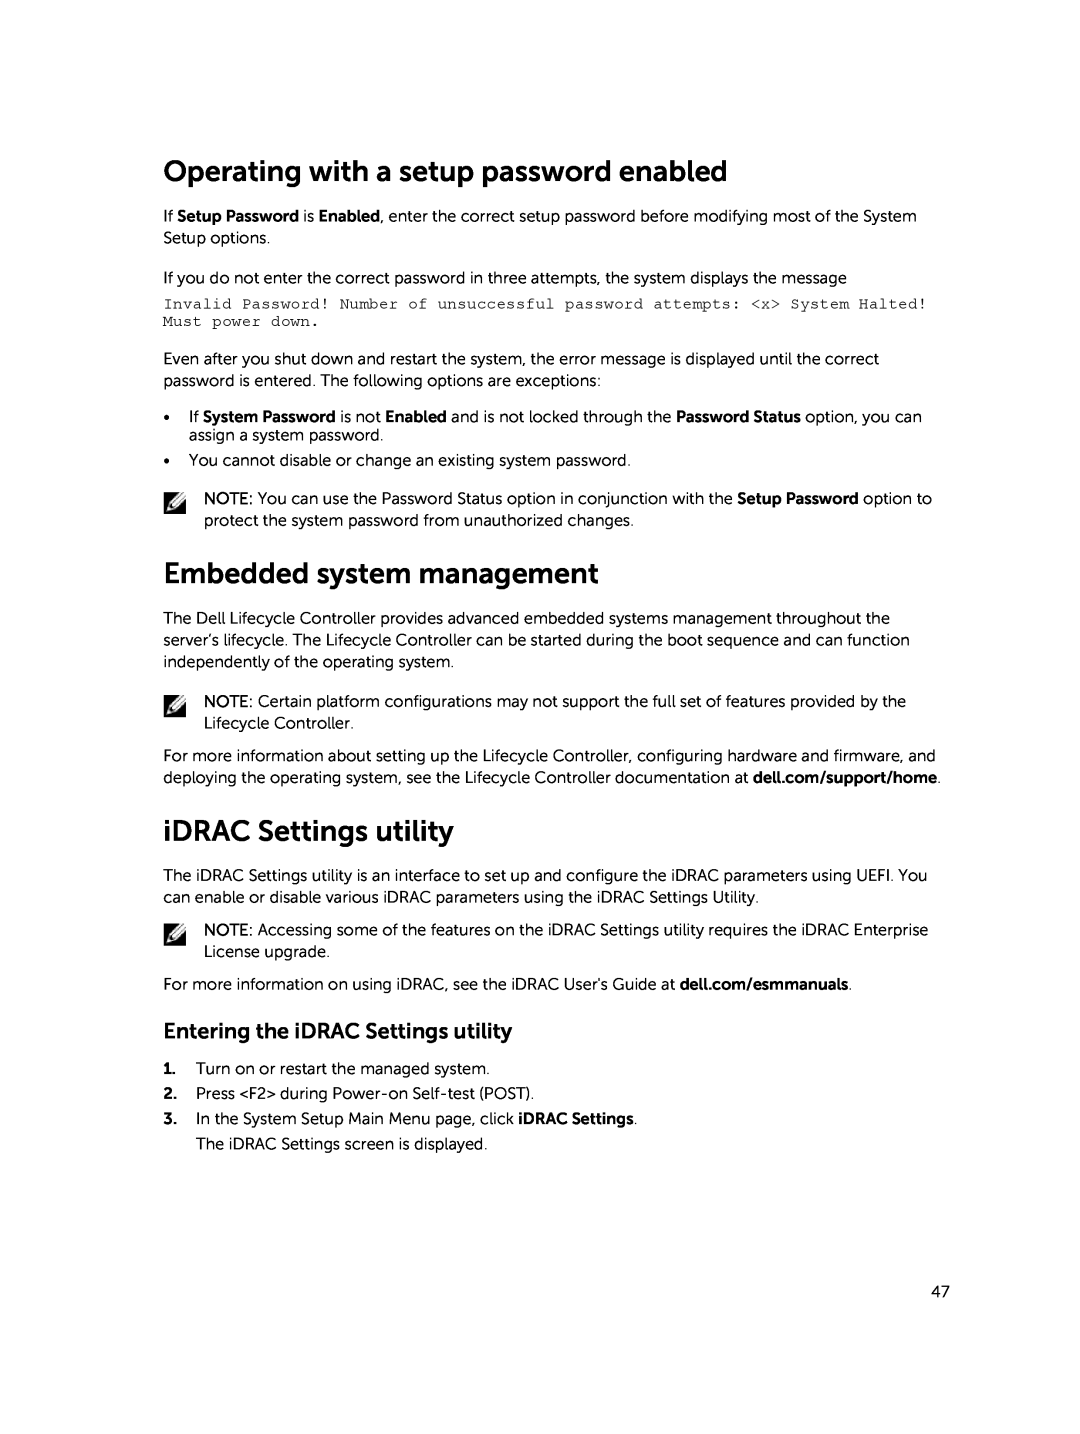 Dell E30S owner manual Operating with a setup password enabled, Embedded system management, iDRAC Settings utility 